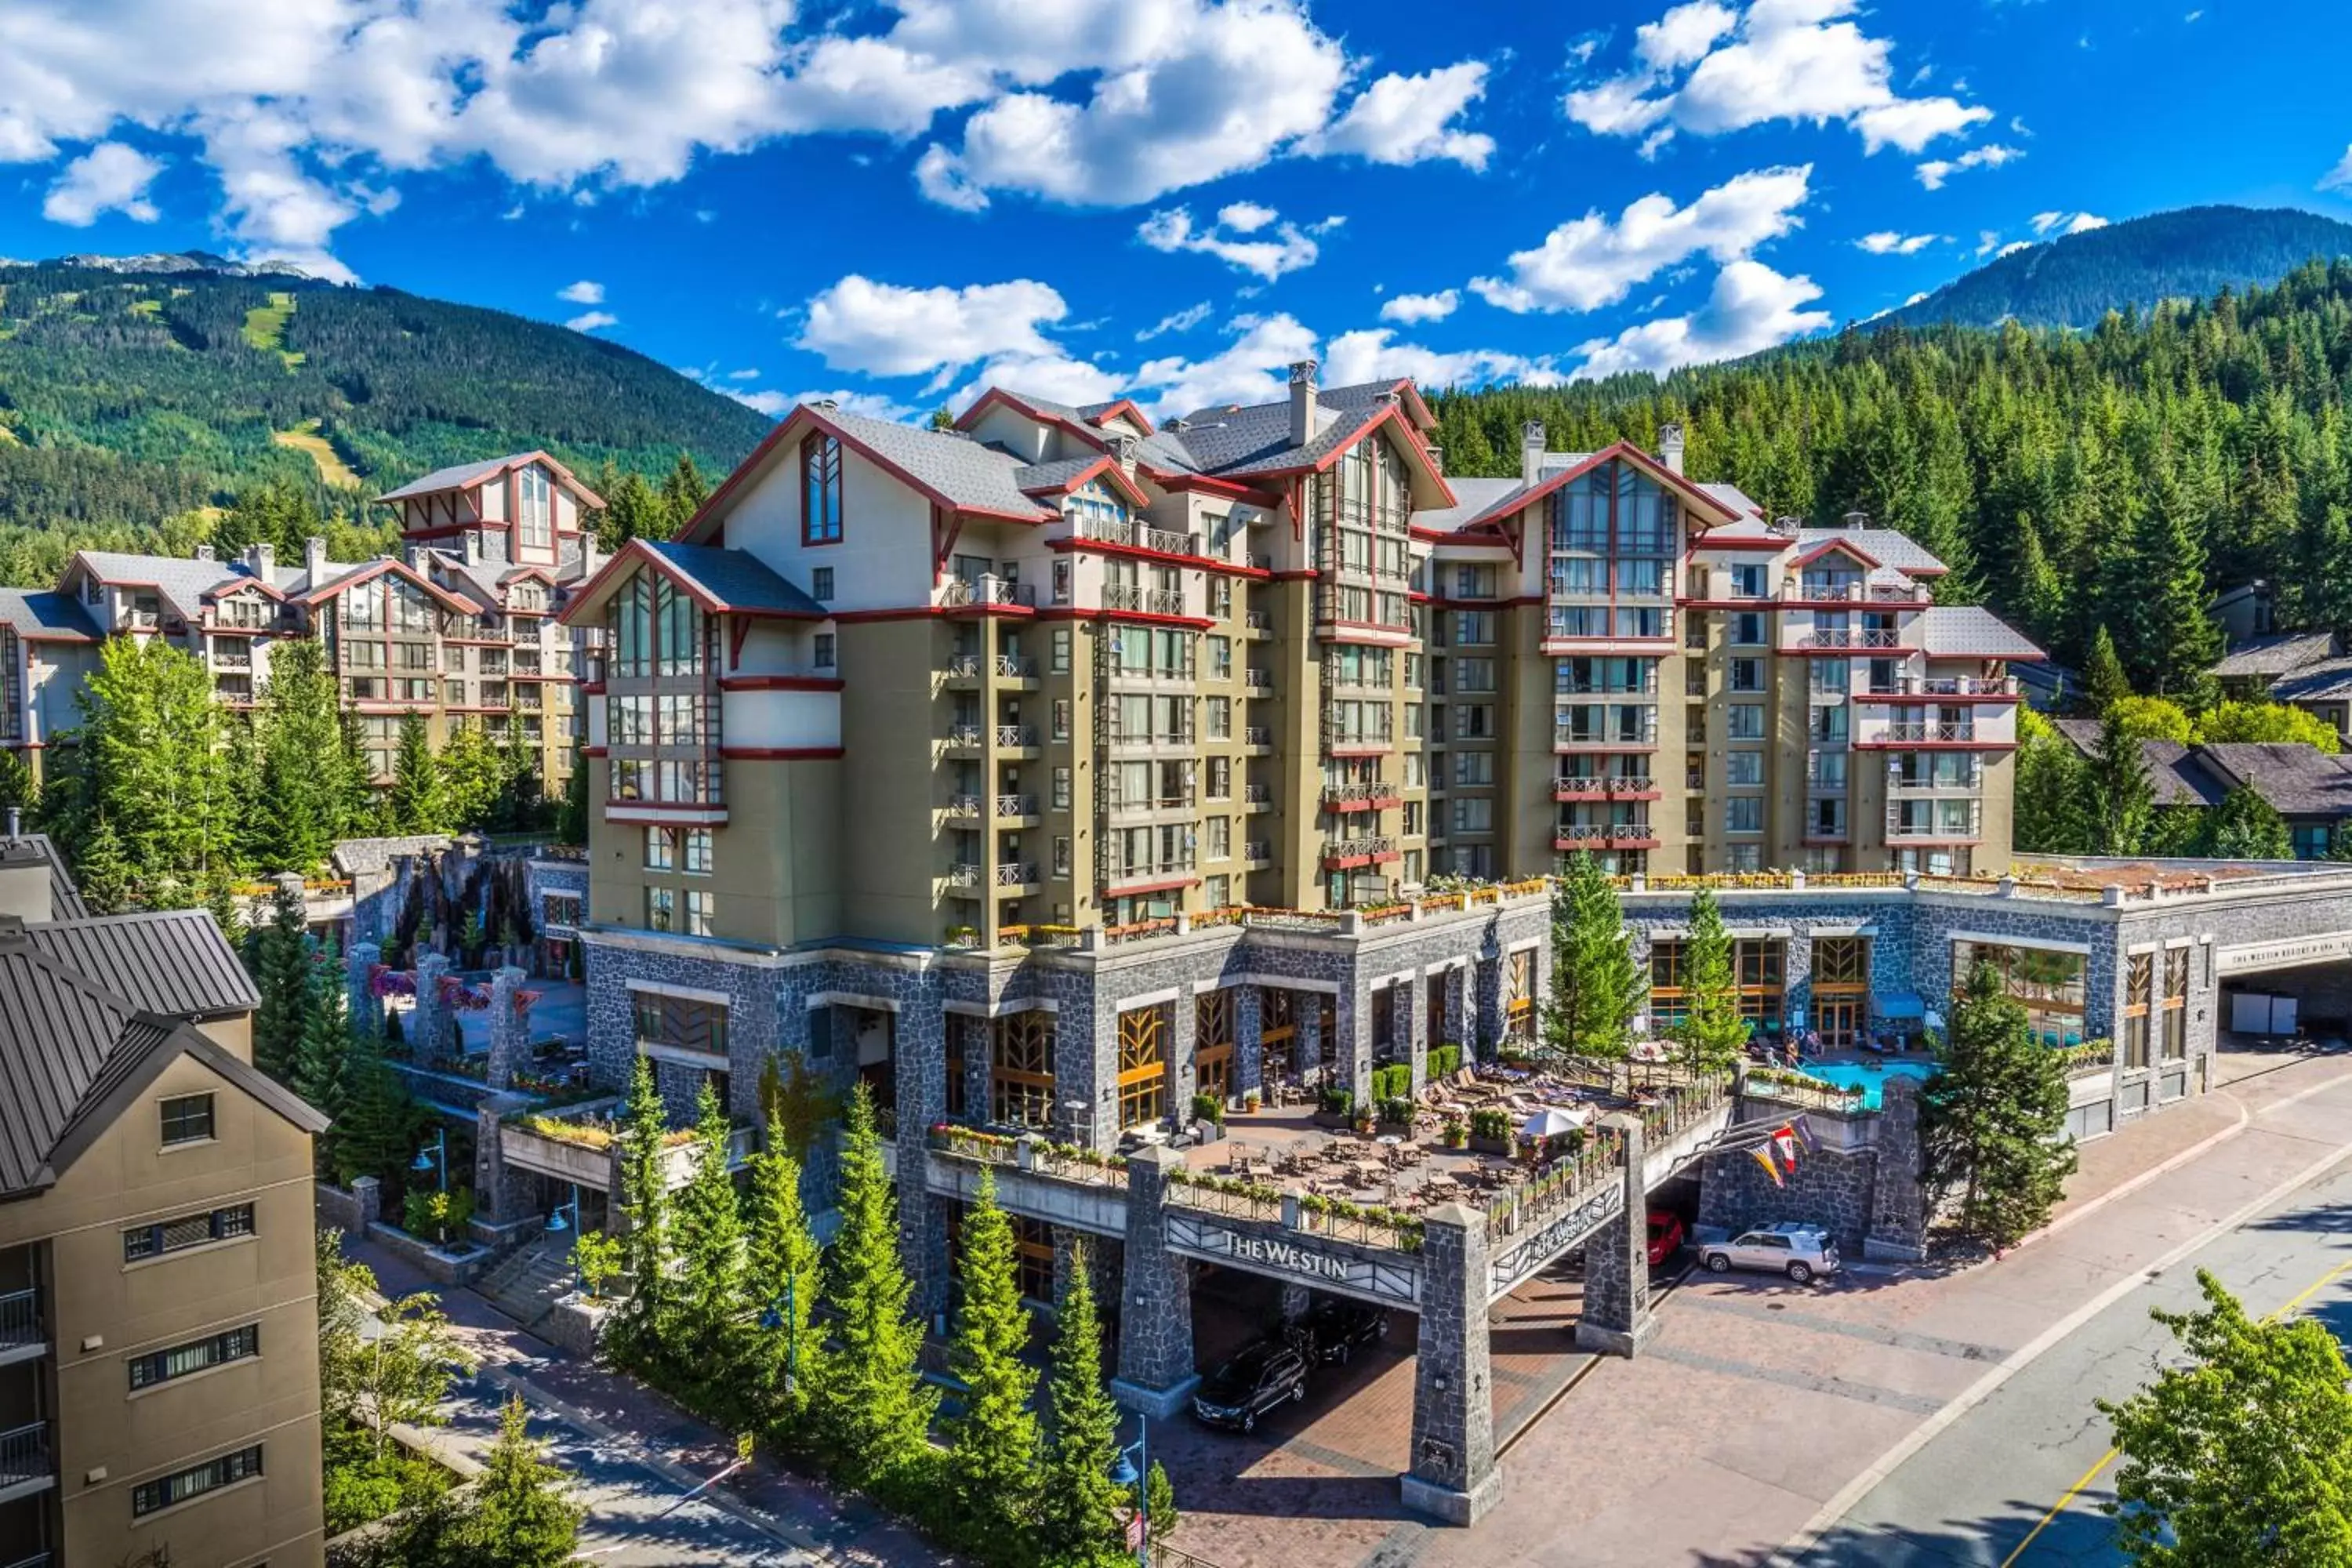 Property building in The Westin Resort & Spa, Whistler